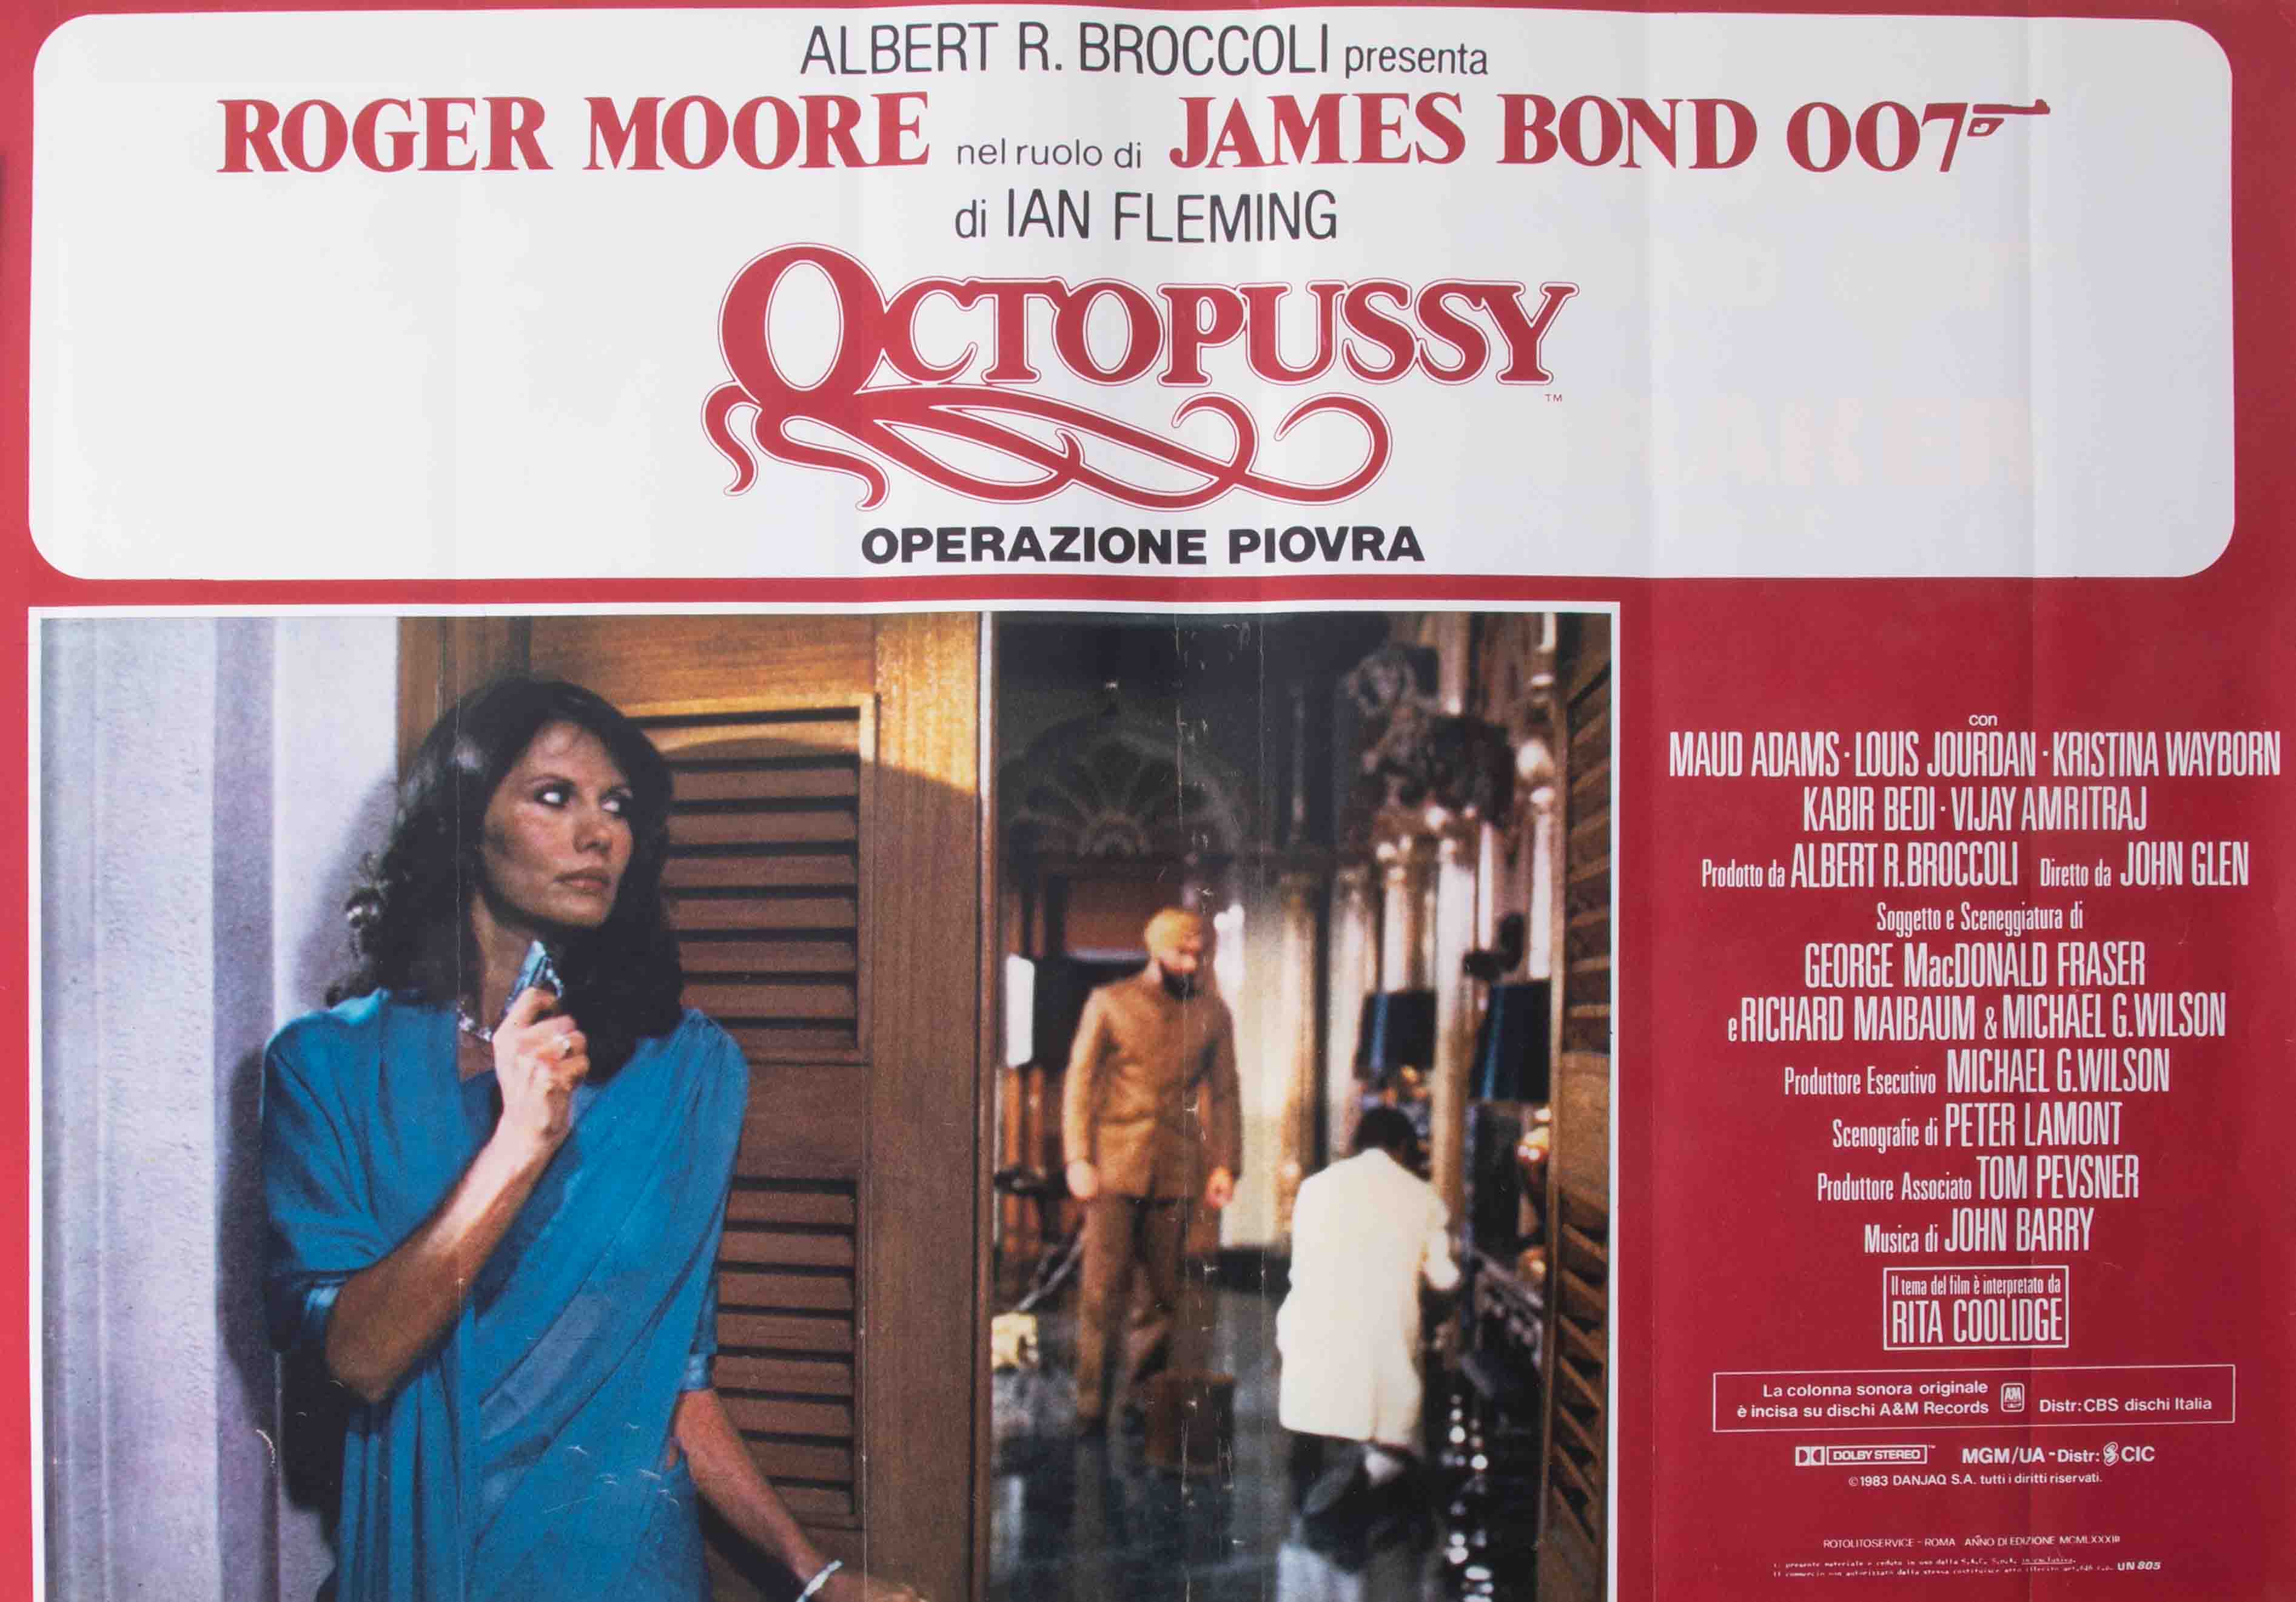 James Bond Poster, Five Italian originals 'Moonraker', 'Octopussy' and 'A View To A Kill', 65cm x - Image 4 of 5